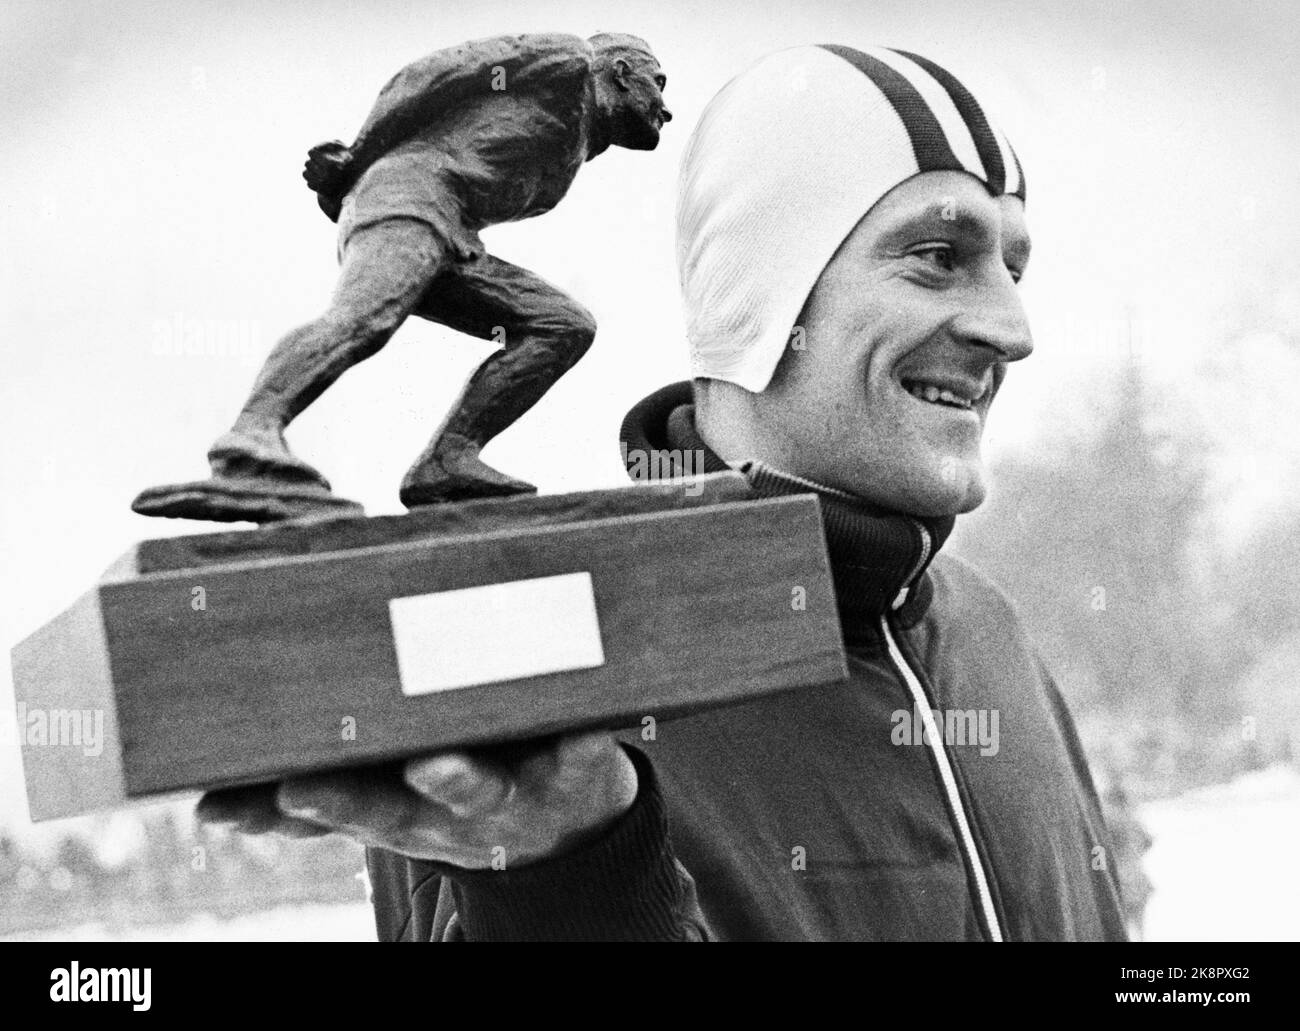 Olympic victory Black and White Stock Photos & Images - Page 2 - Alamy